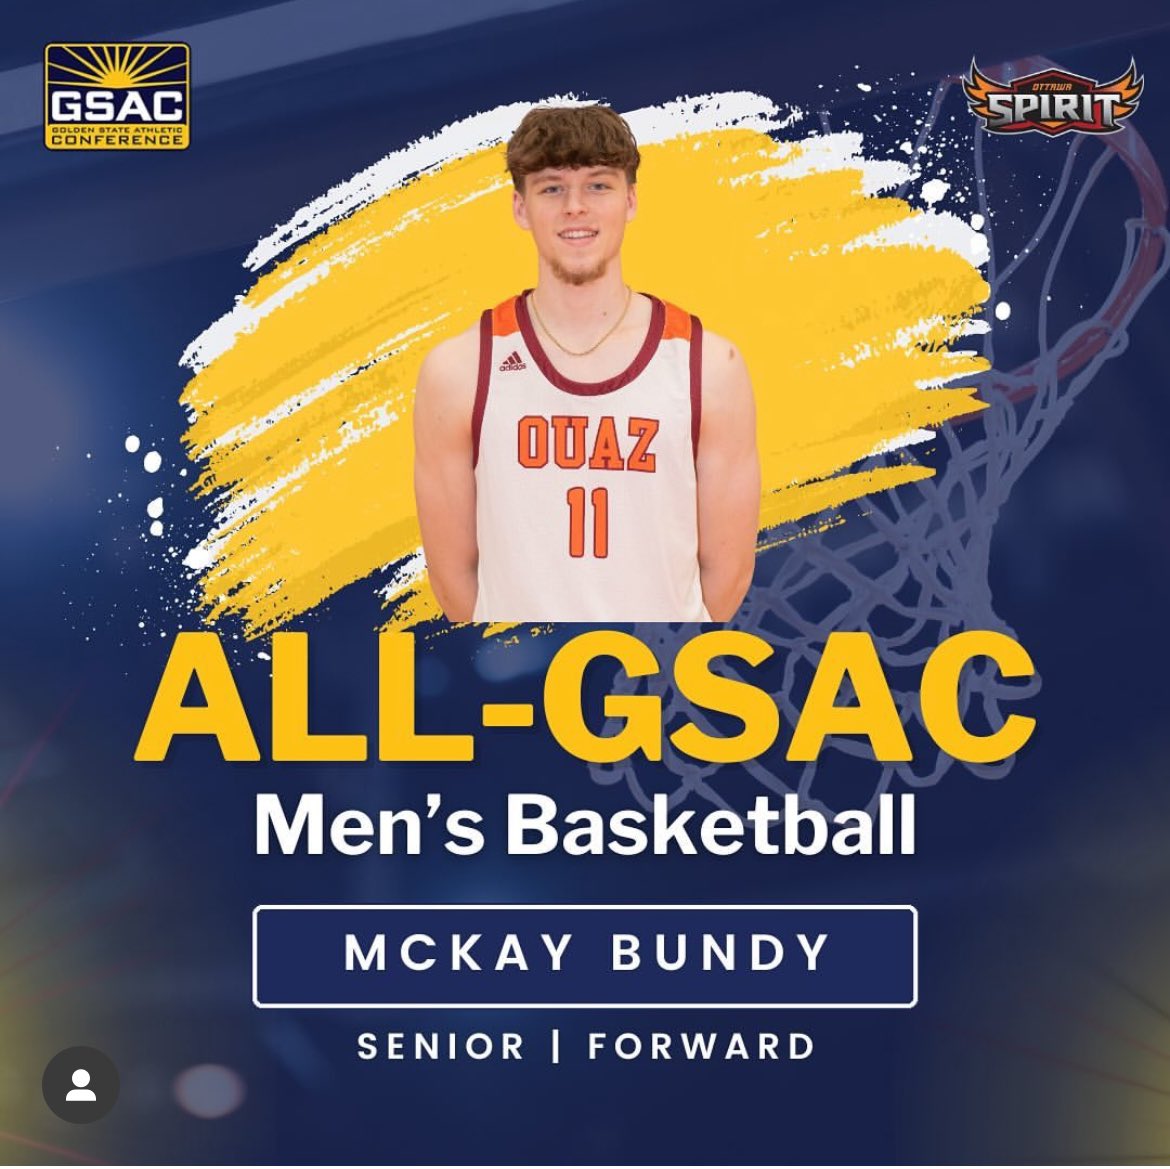 He poured himself into the game since that first summer of HS ball his freshman year so he could help his teams win, and not many players will finish their HS/College careers with as many wins as @mckaybundy27